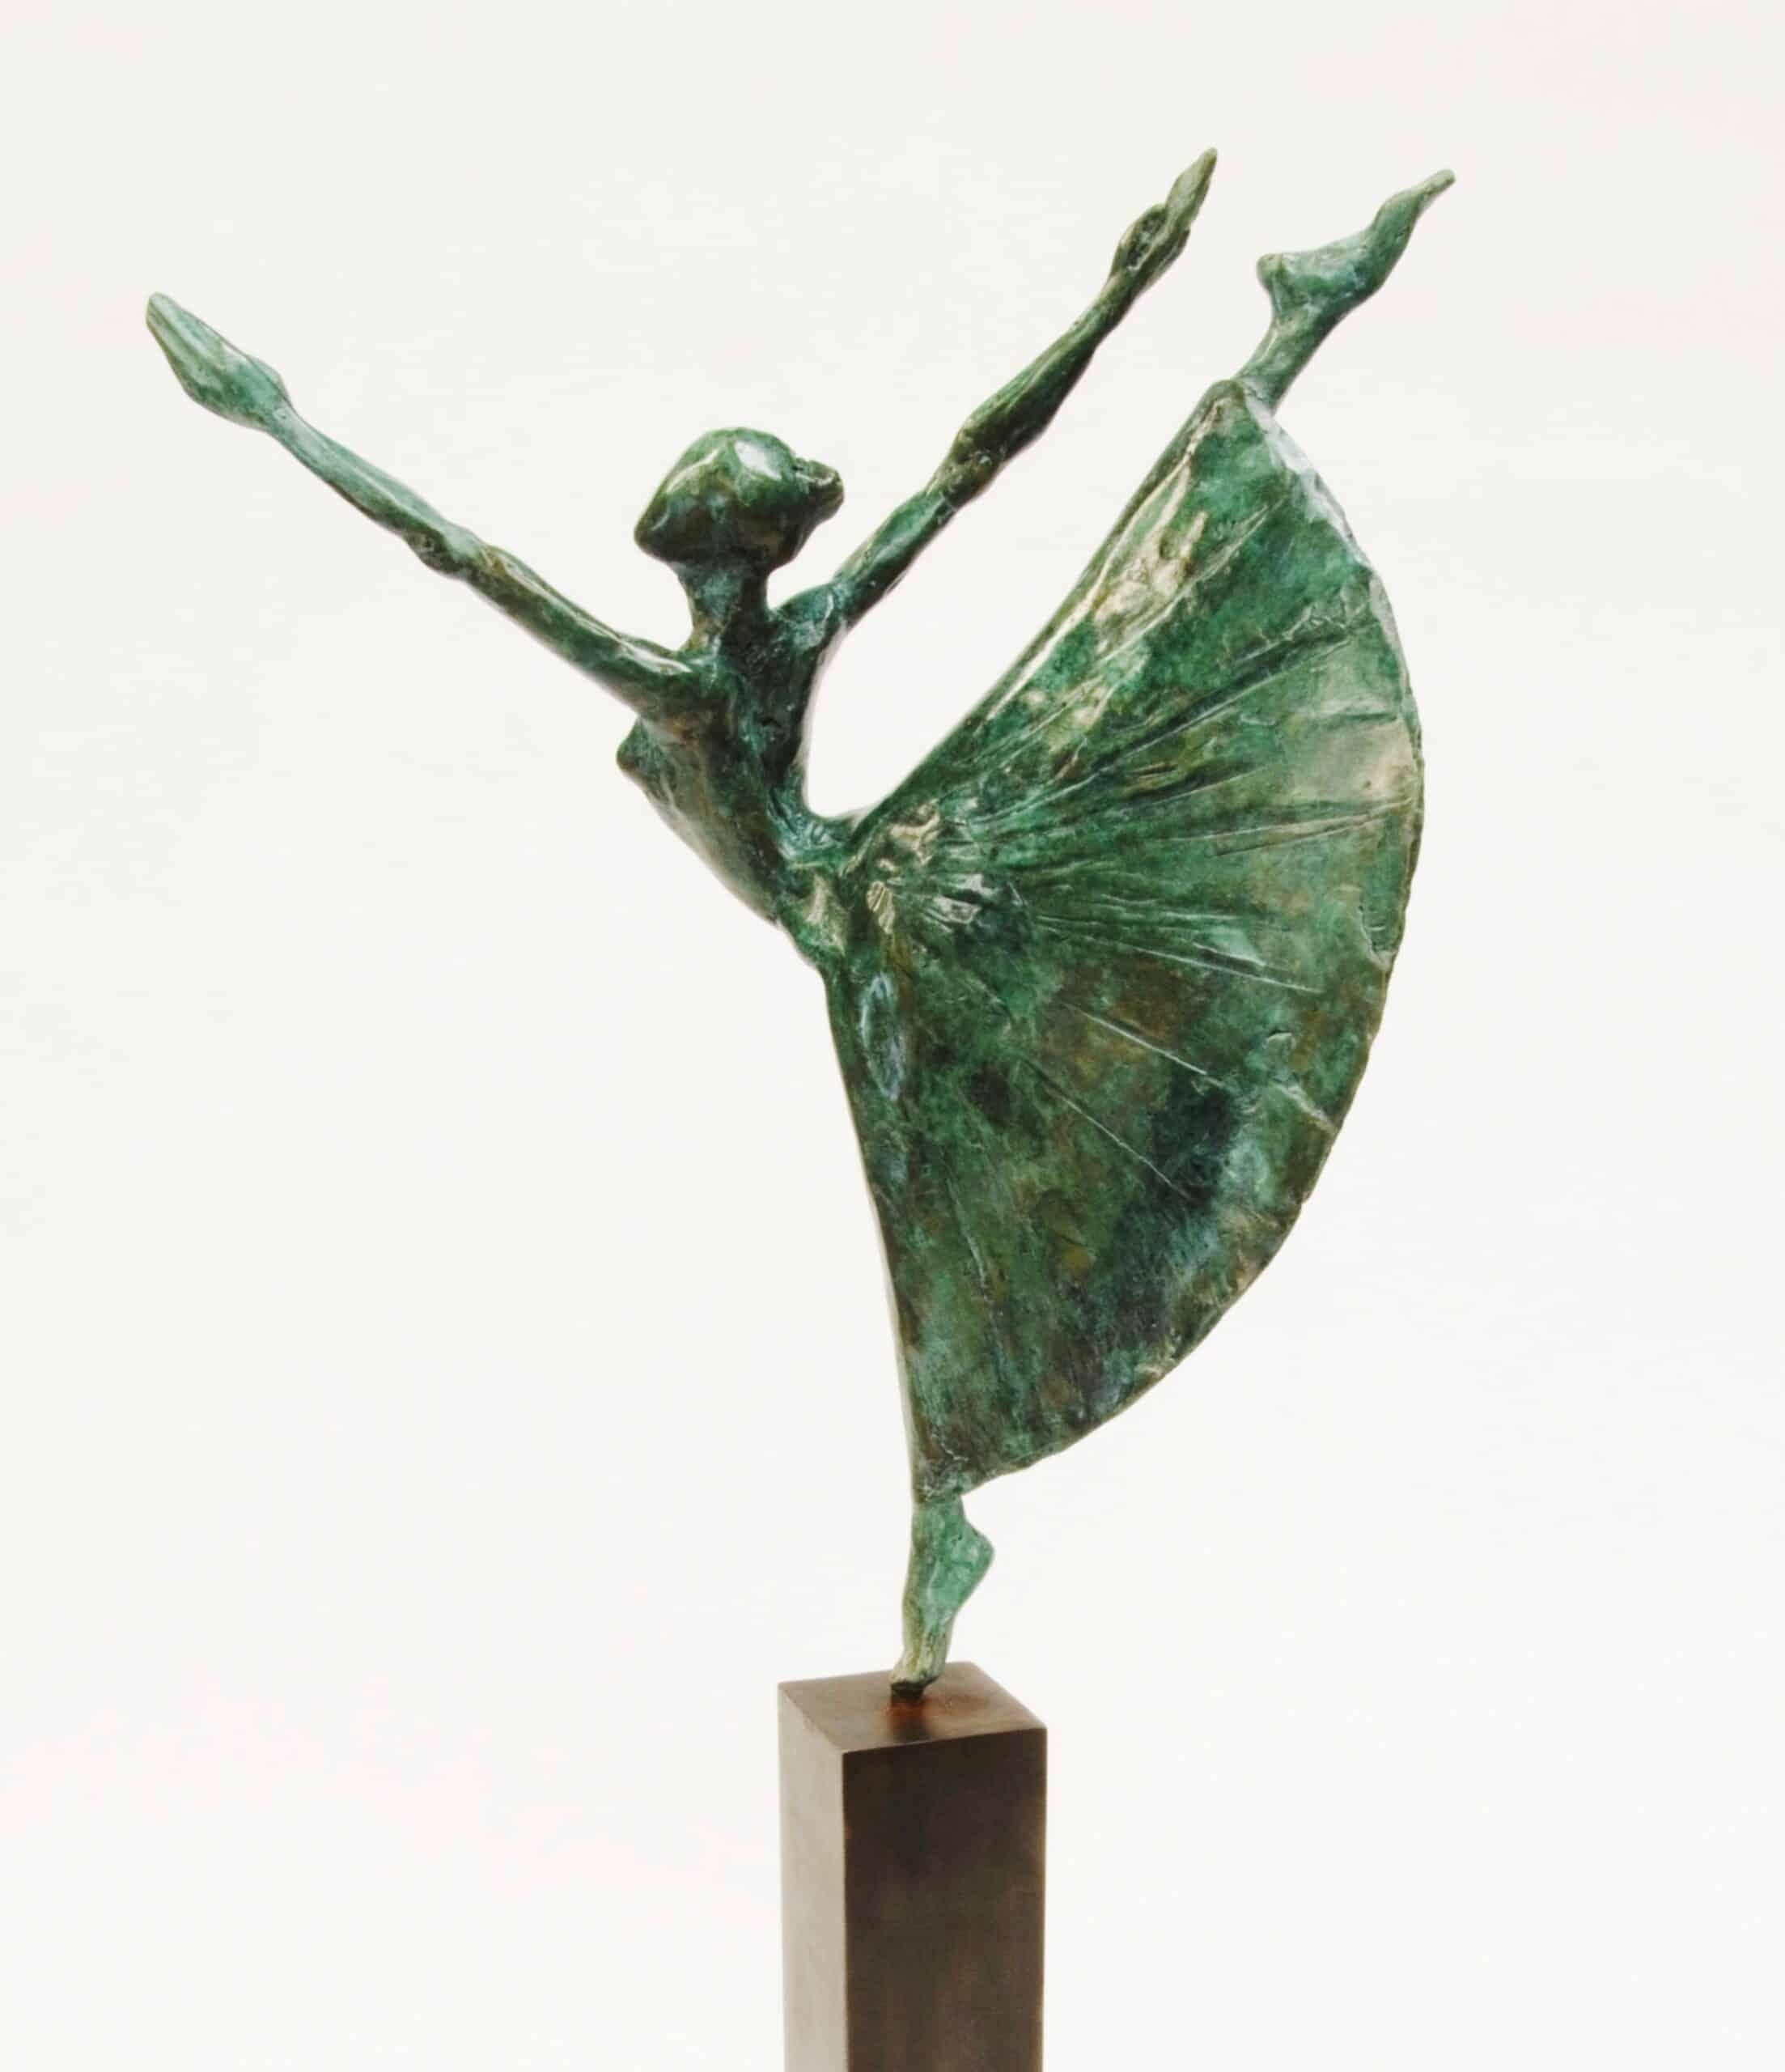 Dancer With Long Tutu is a bronze sculpture by contemporary artist Yann Guillon, dimensions are 25 × 15 × 8 cm (9.8 × 5.9 × 3.1 in). Height of the sculpture with the metal base: 45 cm (17.7 in). 
The sculpture is signed and numbered, it is part of a